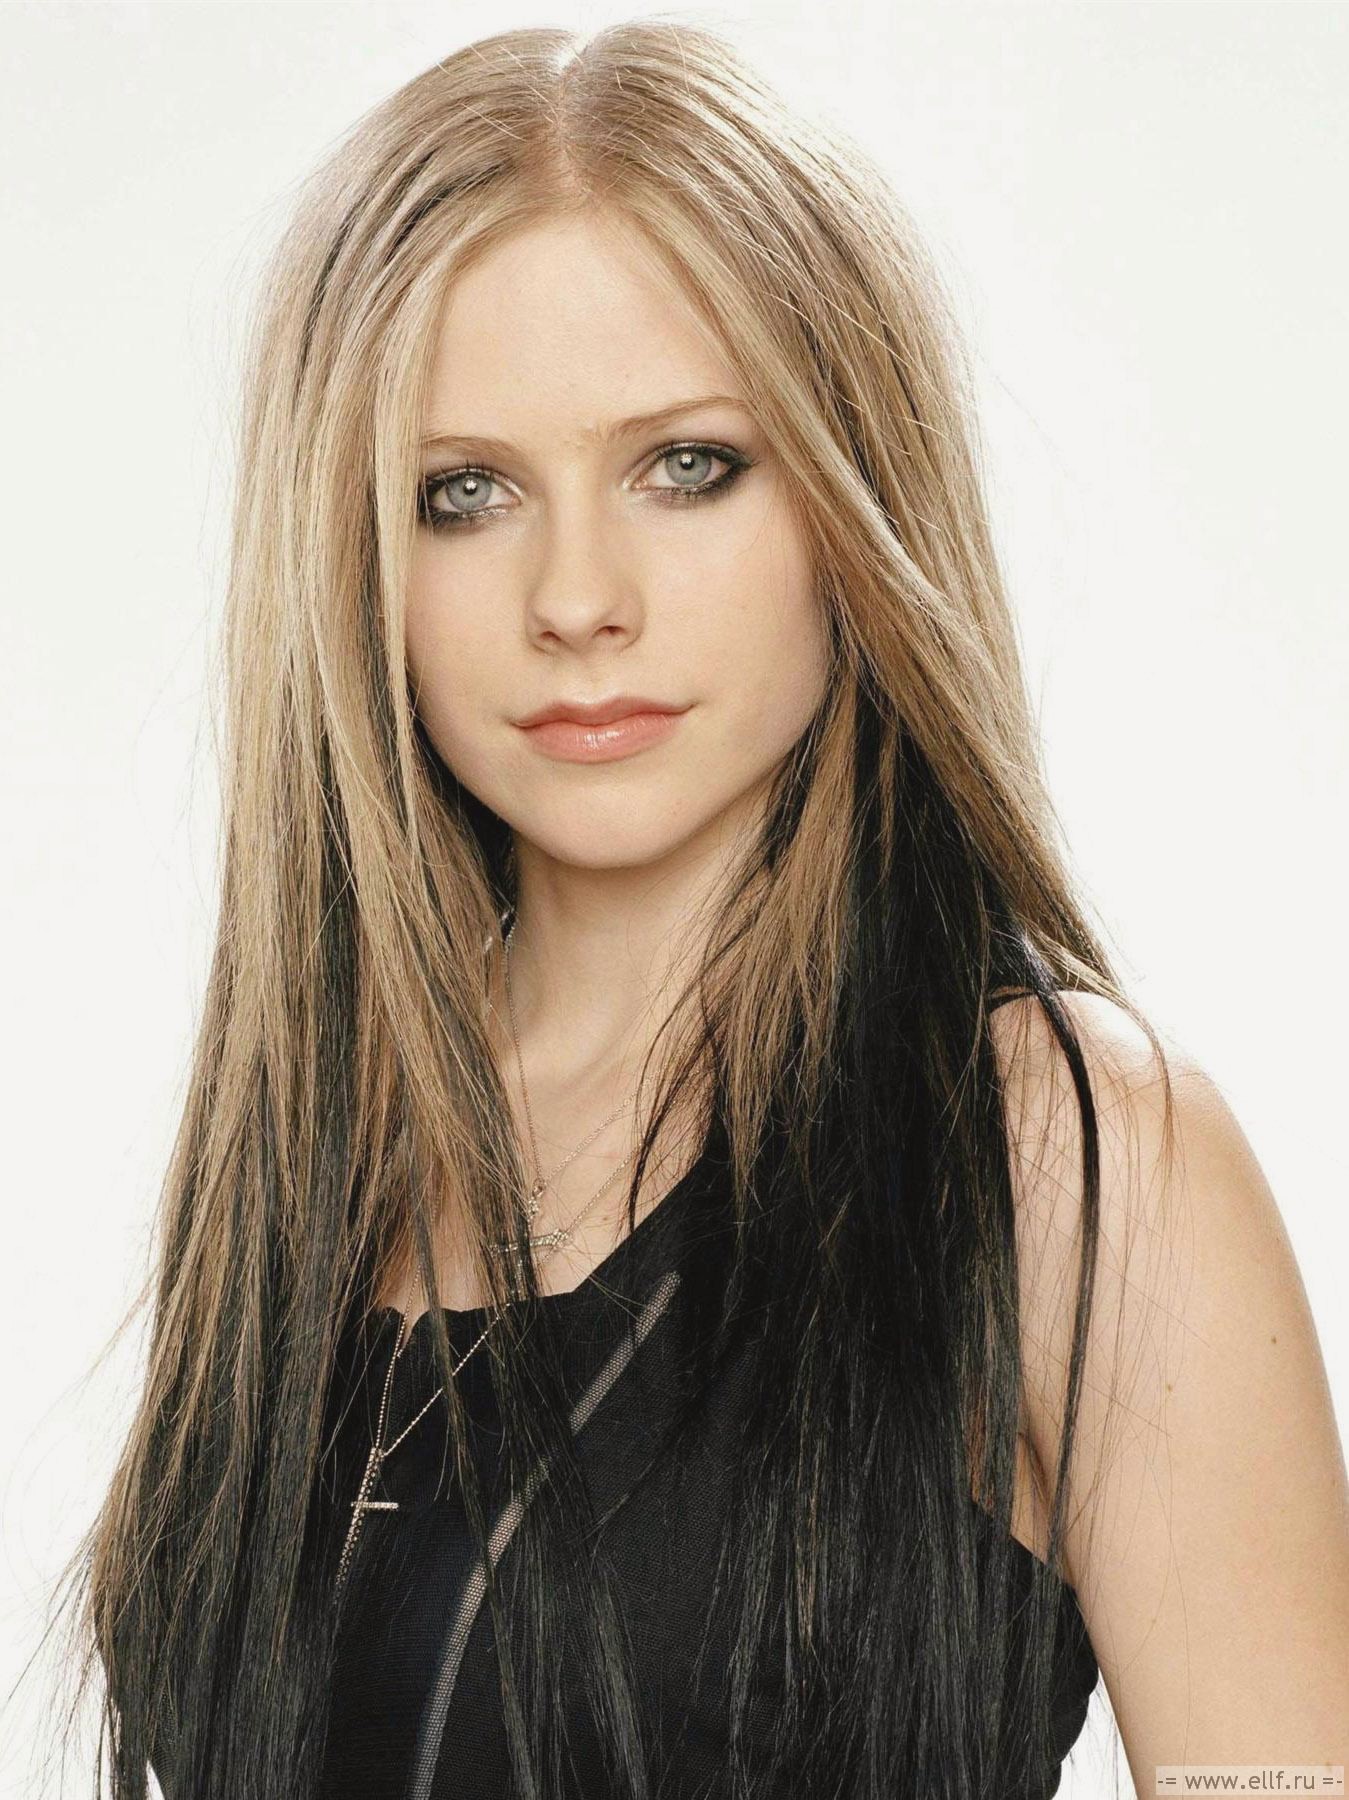 avril lavigne wallpaper,hair,face,blond,hairstyle,eyebrow